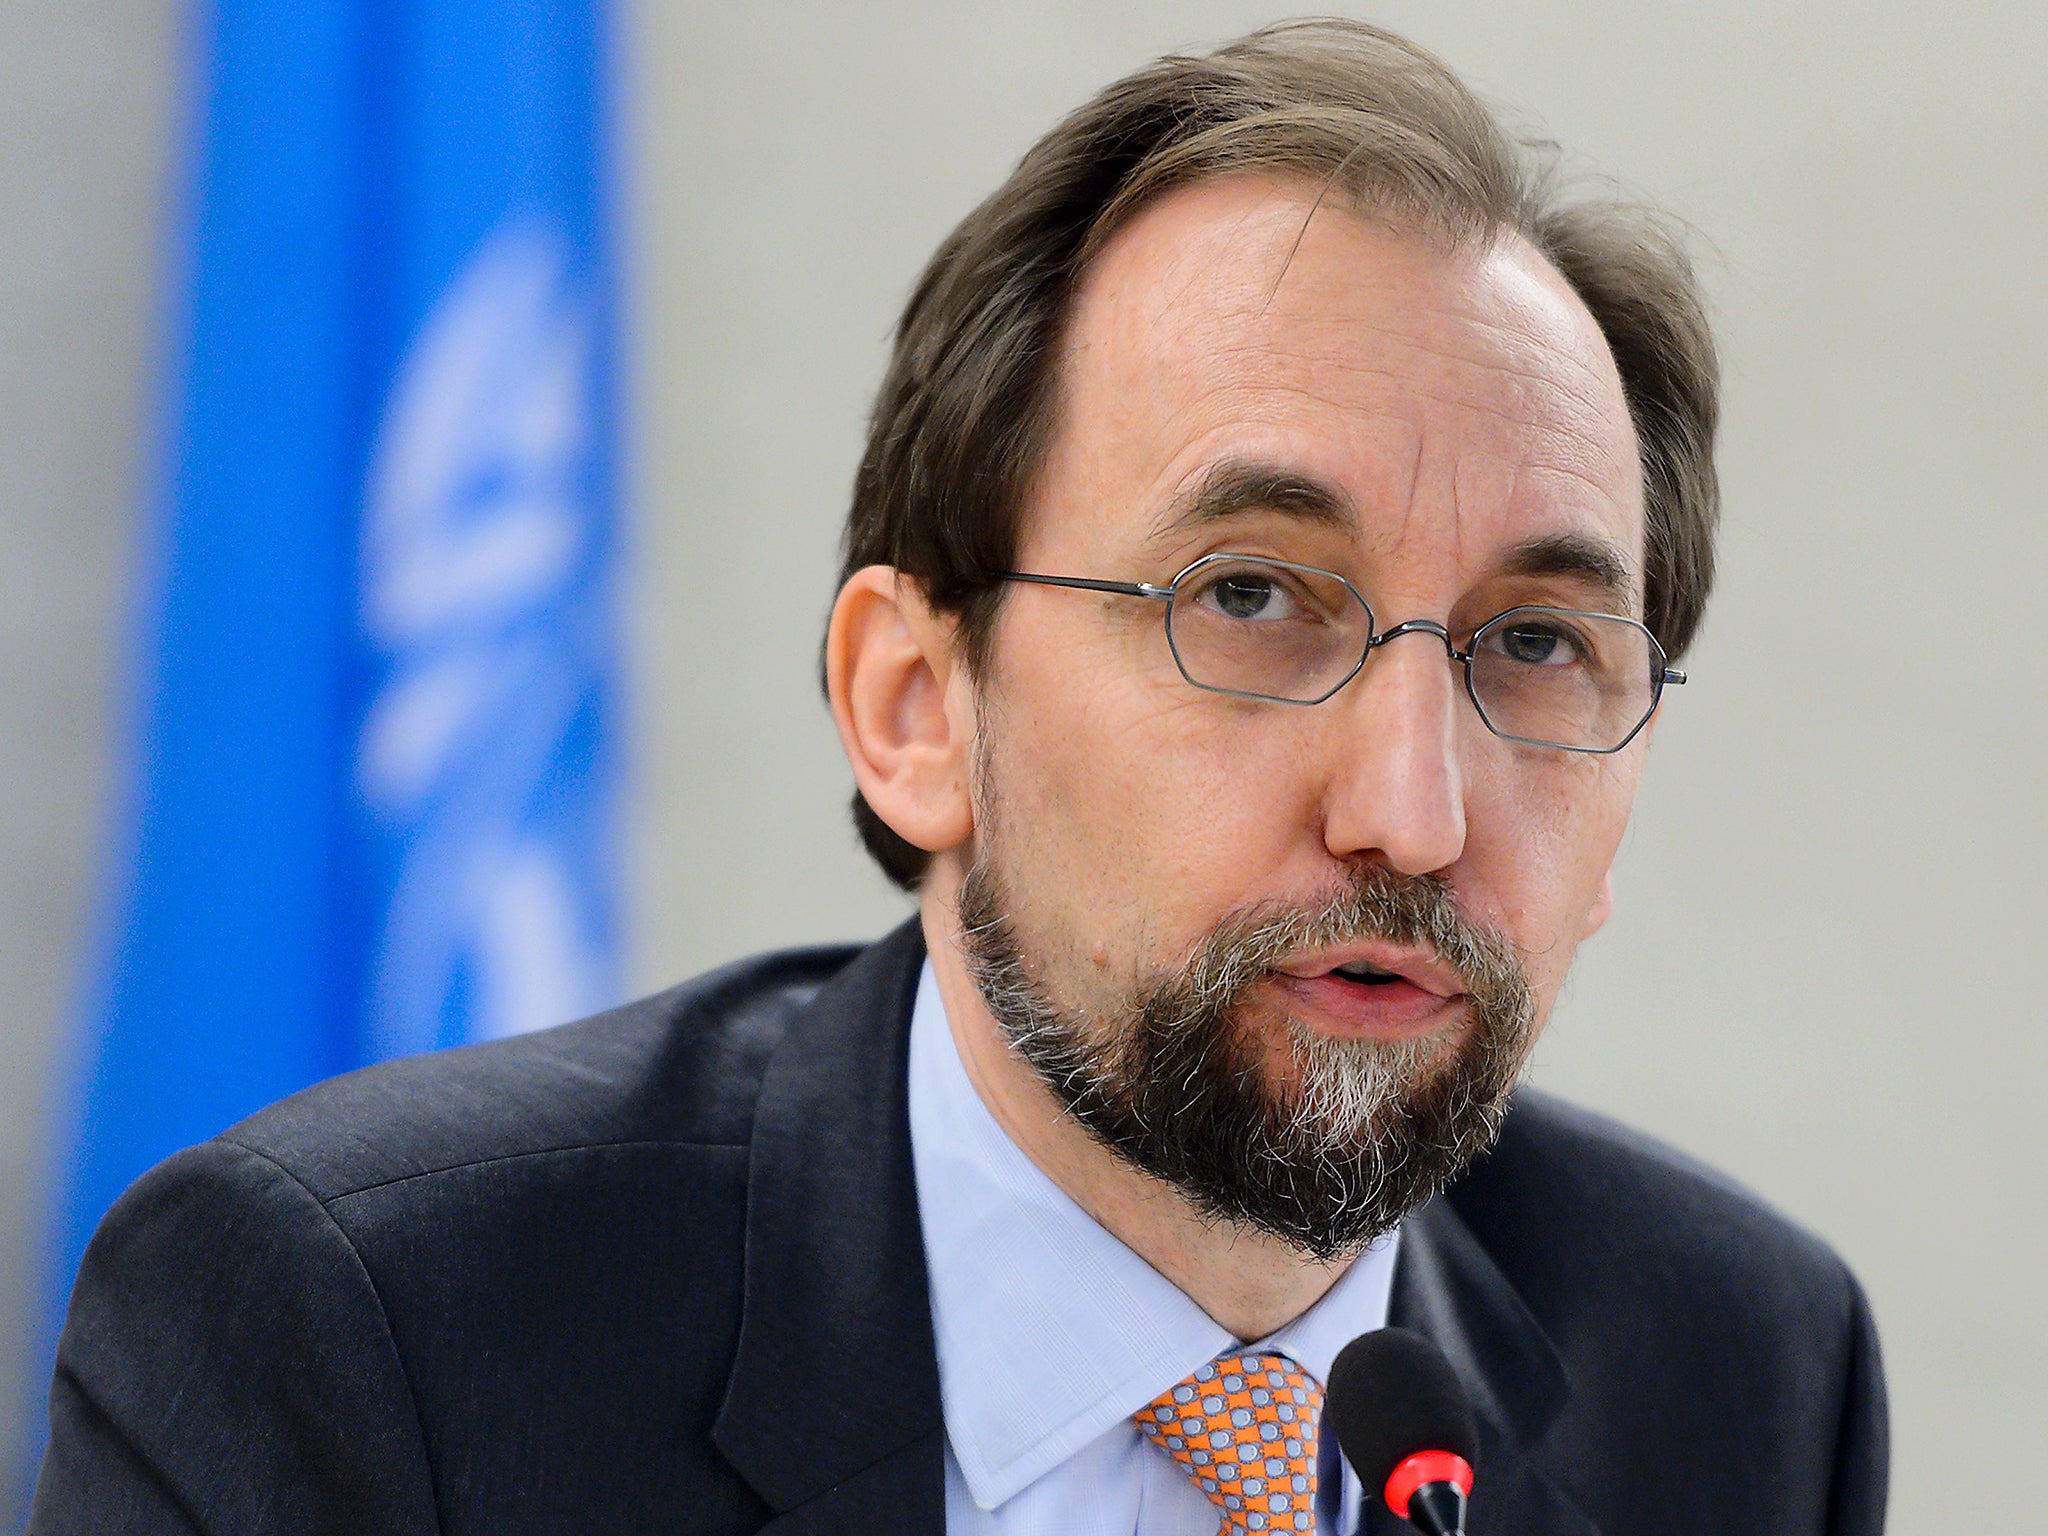 Human rights chief Prince Zeid Ra'ad al Hussein called the ban ‘mean-spirited’